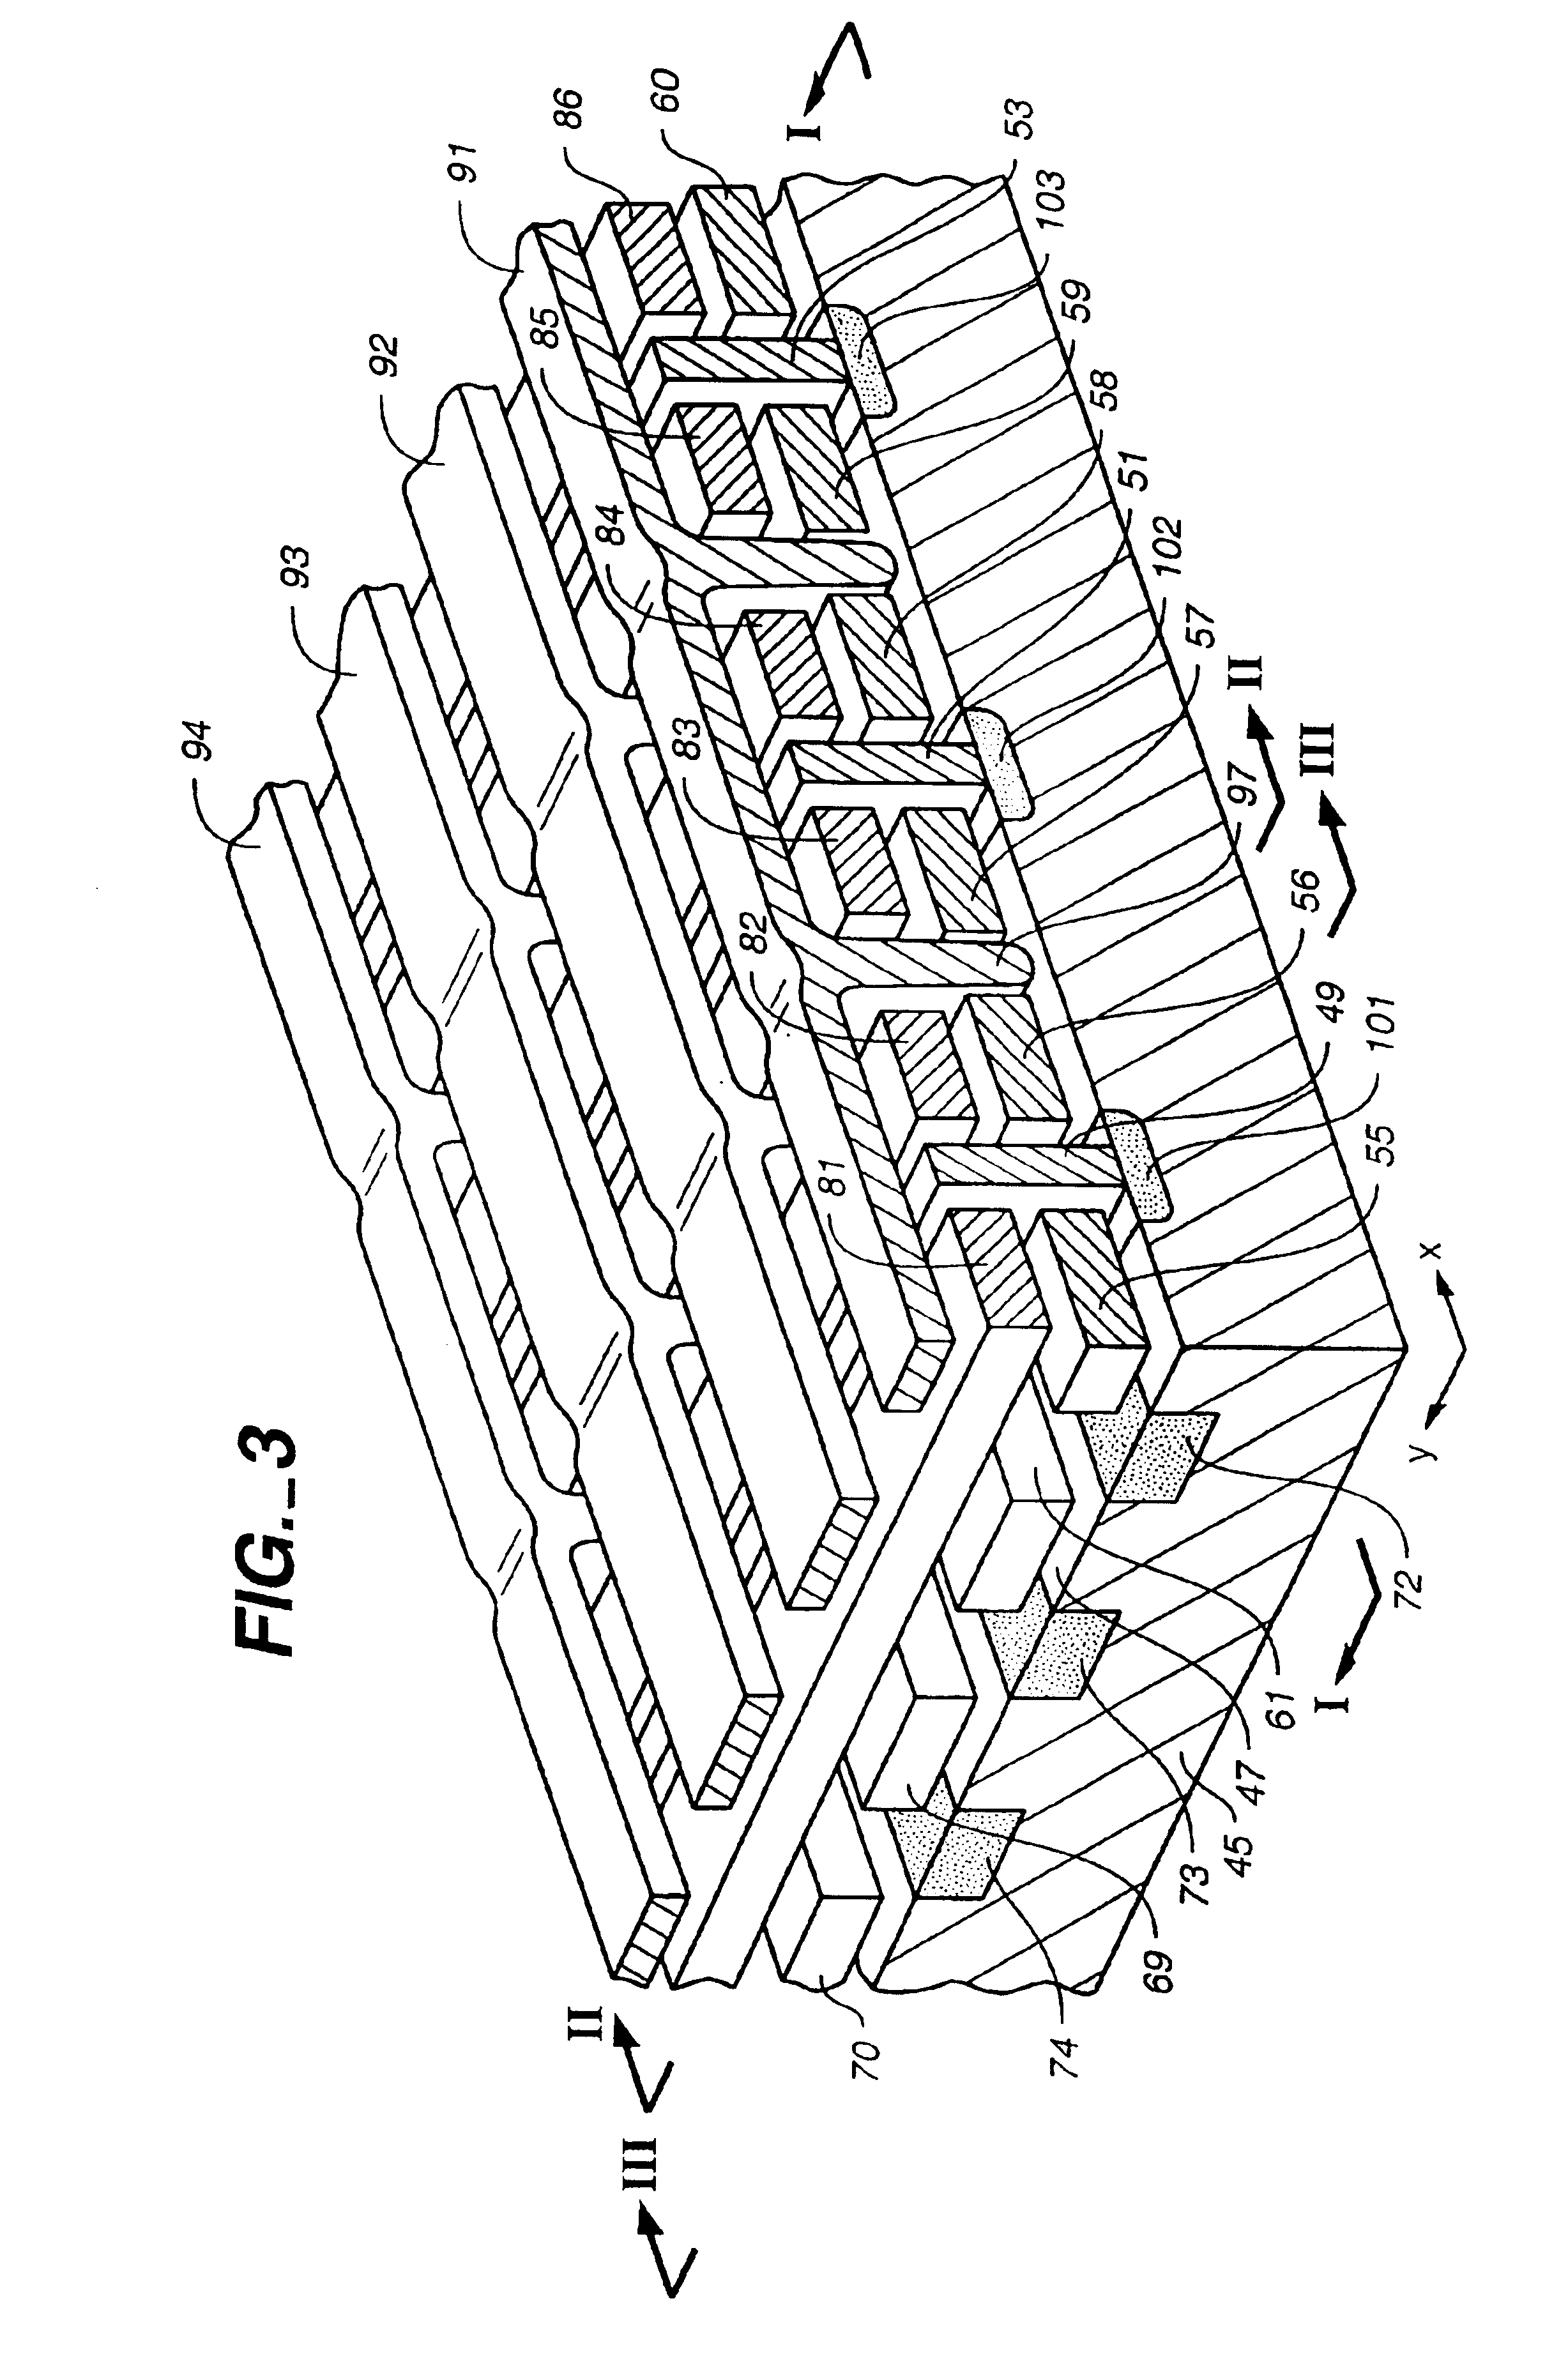 Non-volatile memory cell array having discontinuous source and drain diffusions contacted by continuous bit line conductors and methods of forming